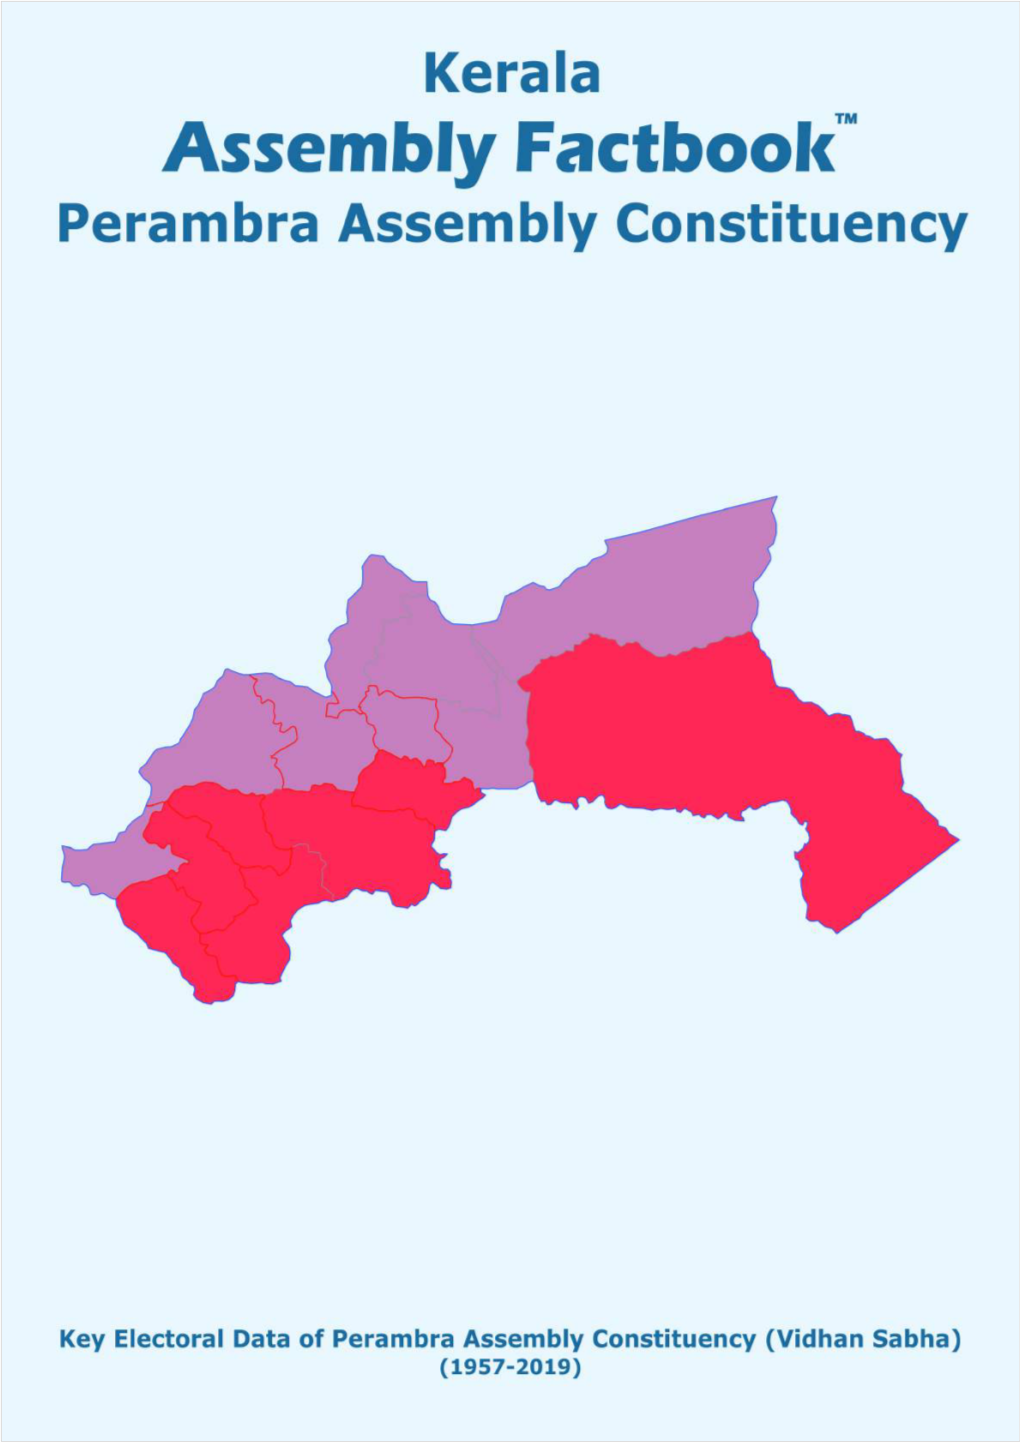 Key Electoral Data of Perambra Assembly Constituency